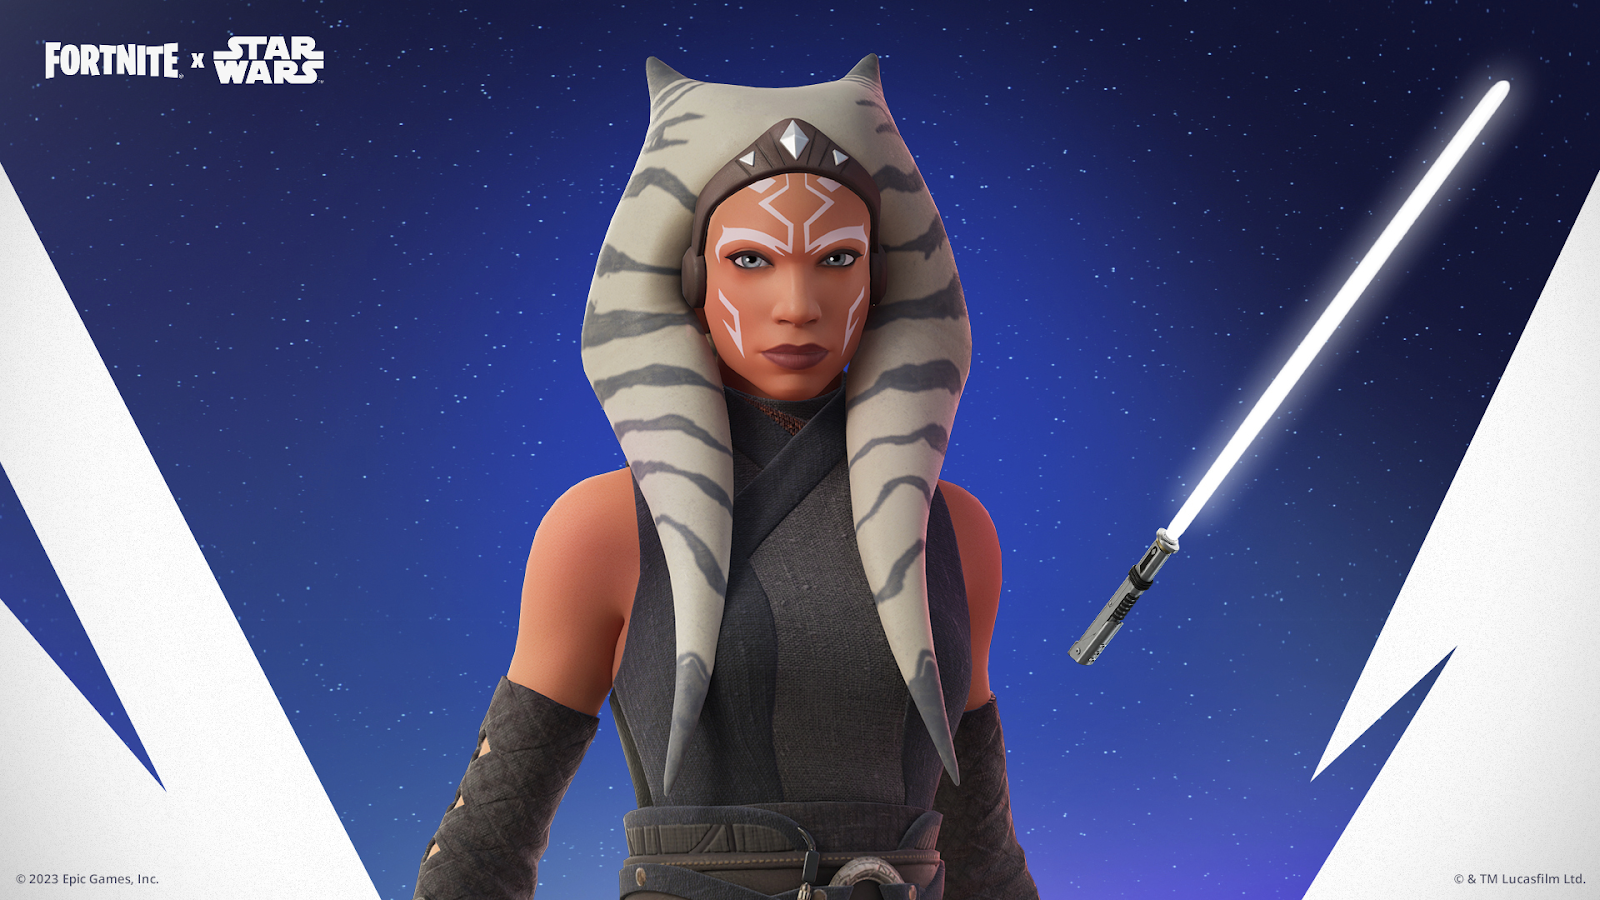 Learn Force Abilities From Ahsoka Tano – Now Unlockable In The Fortnite Battle Pass